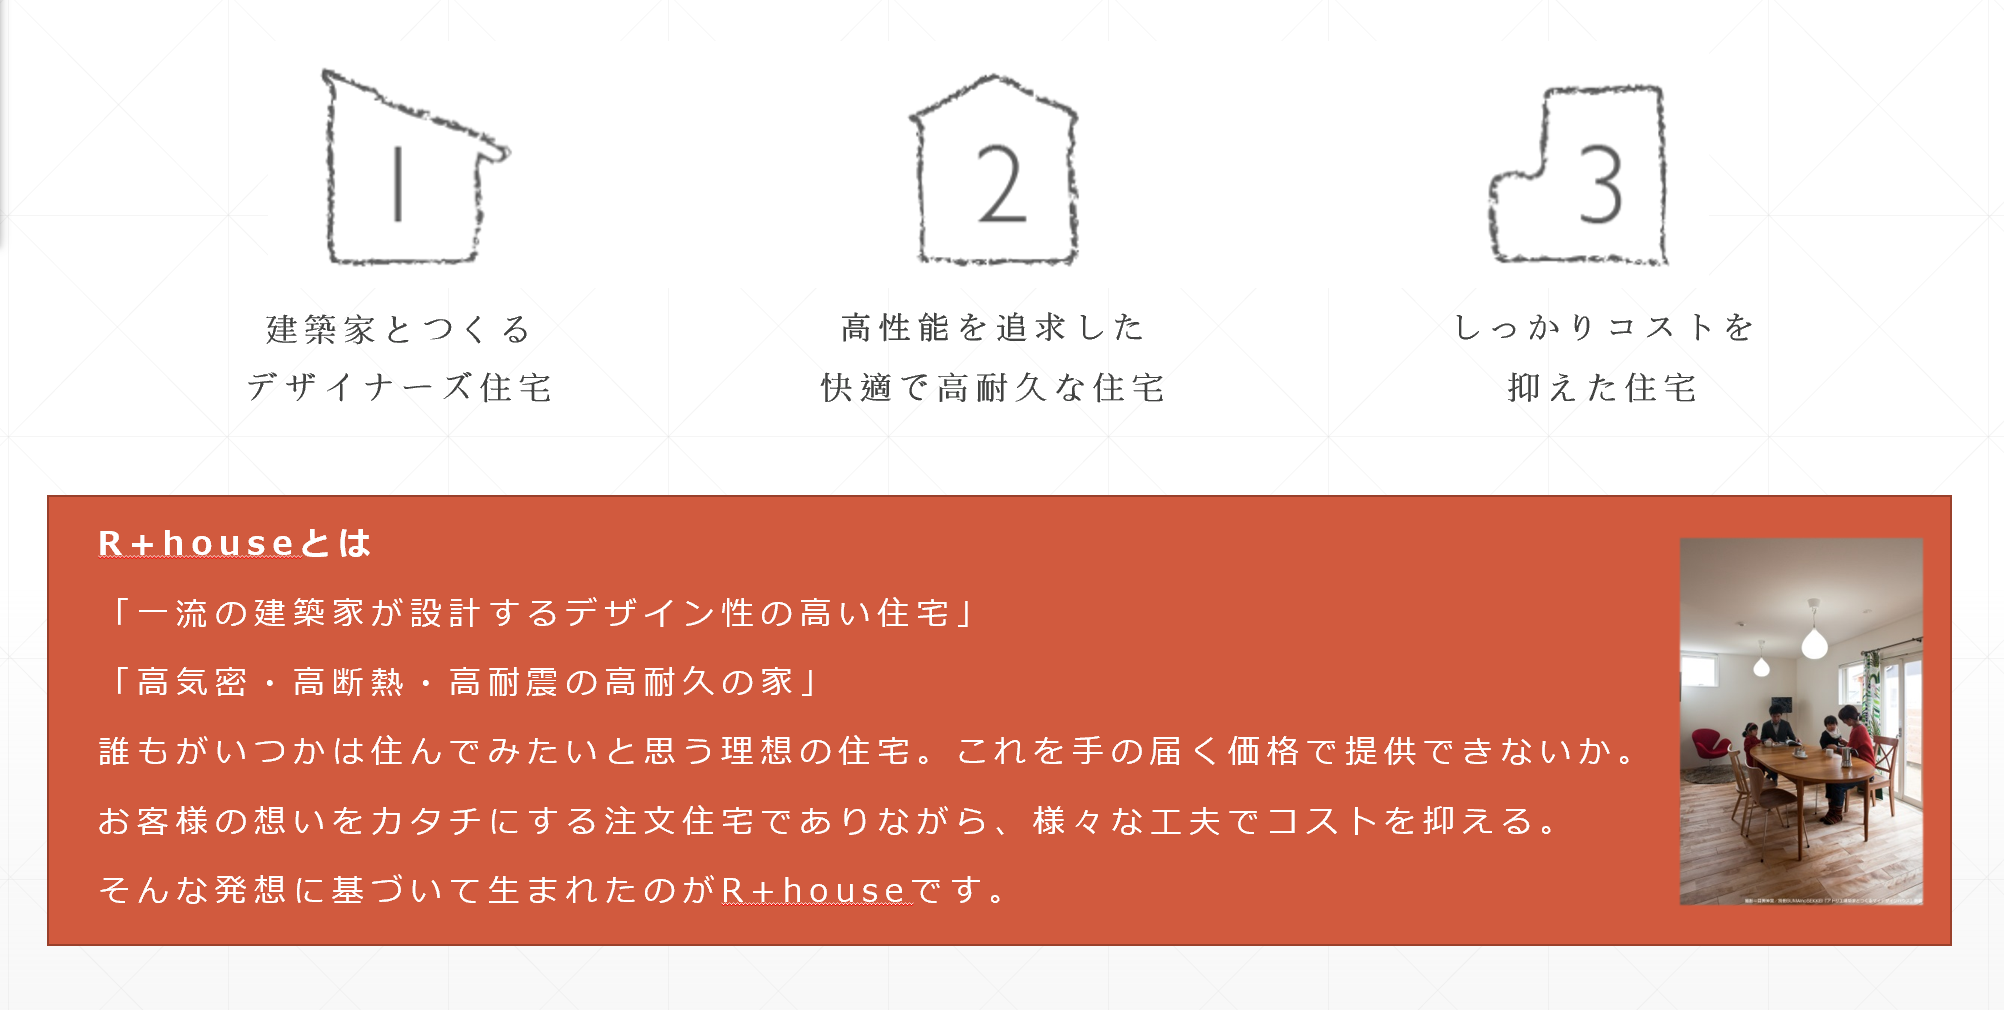 R+house仕組み.png